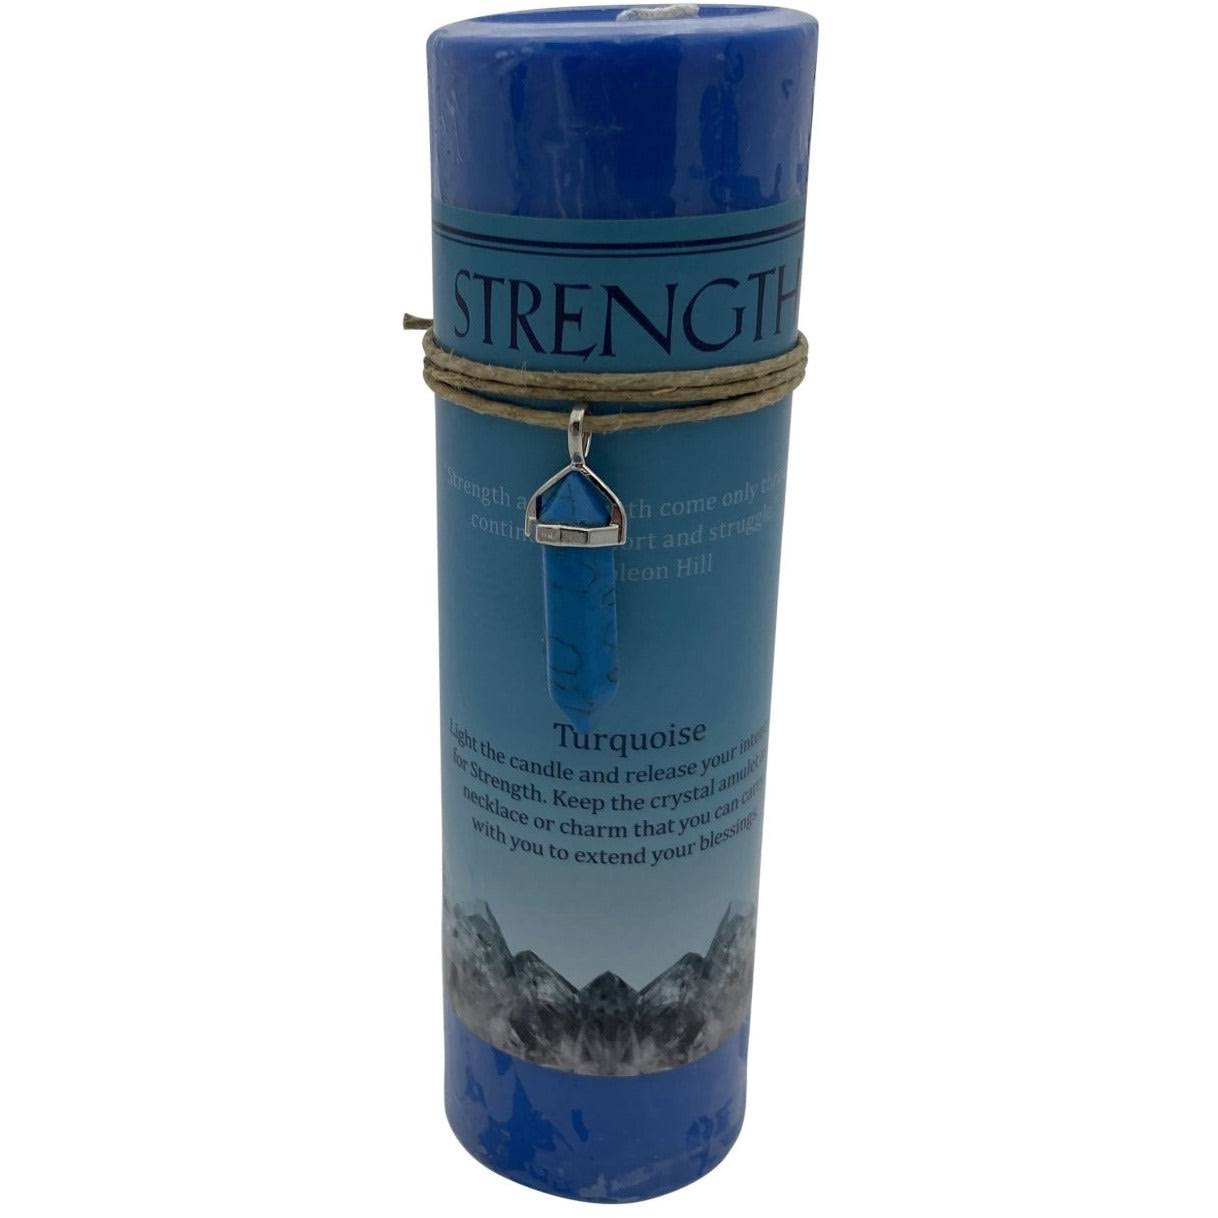 Crystal Energy Strength Turquoise Candle